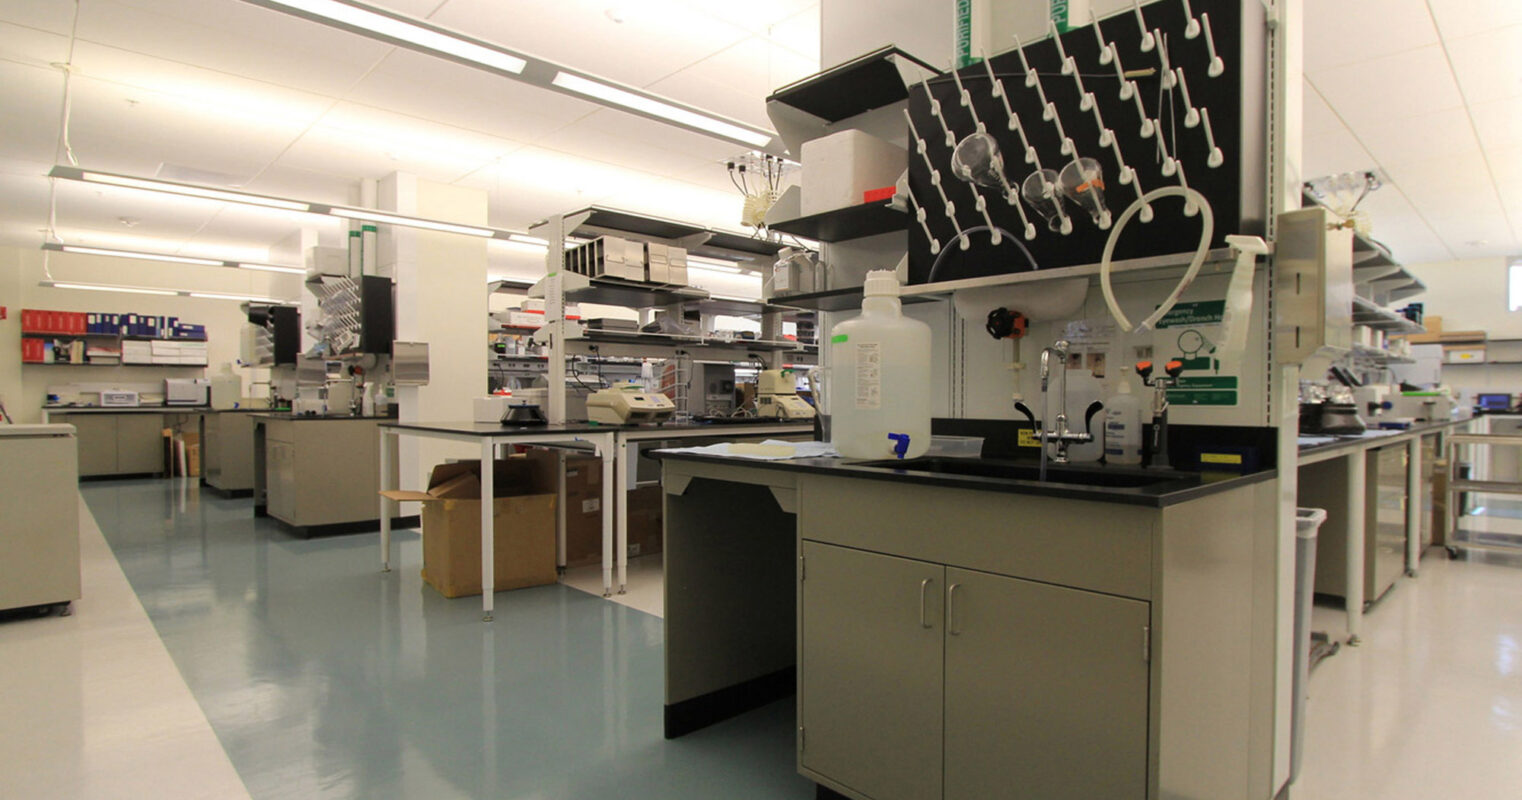 Modern laboratory interior showcasing stainless steel benches, epoxy resin countertops, and state-of-the-art scientific equipment under bright overhead lighting. Epoxy flooring ensures durability and cleanliness against chemical spills.